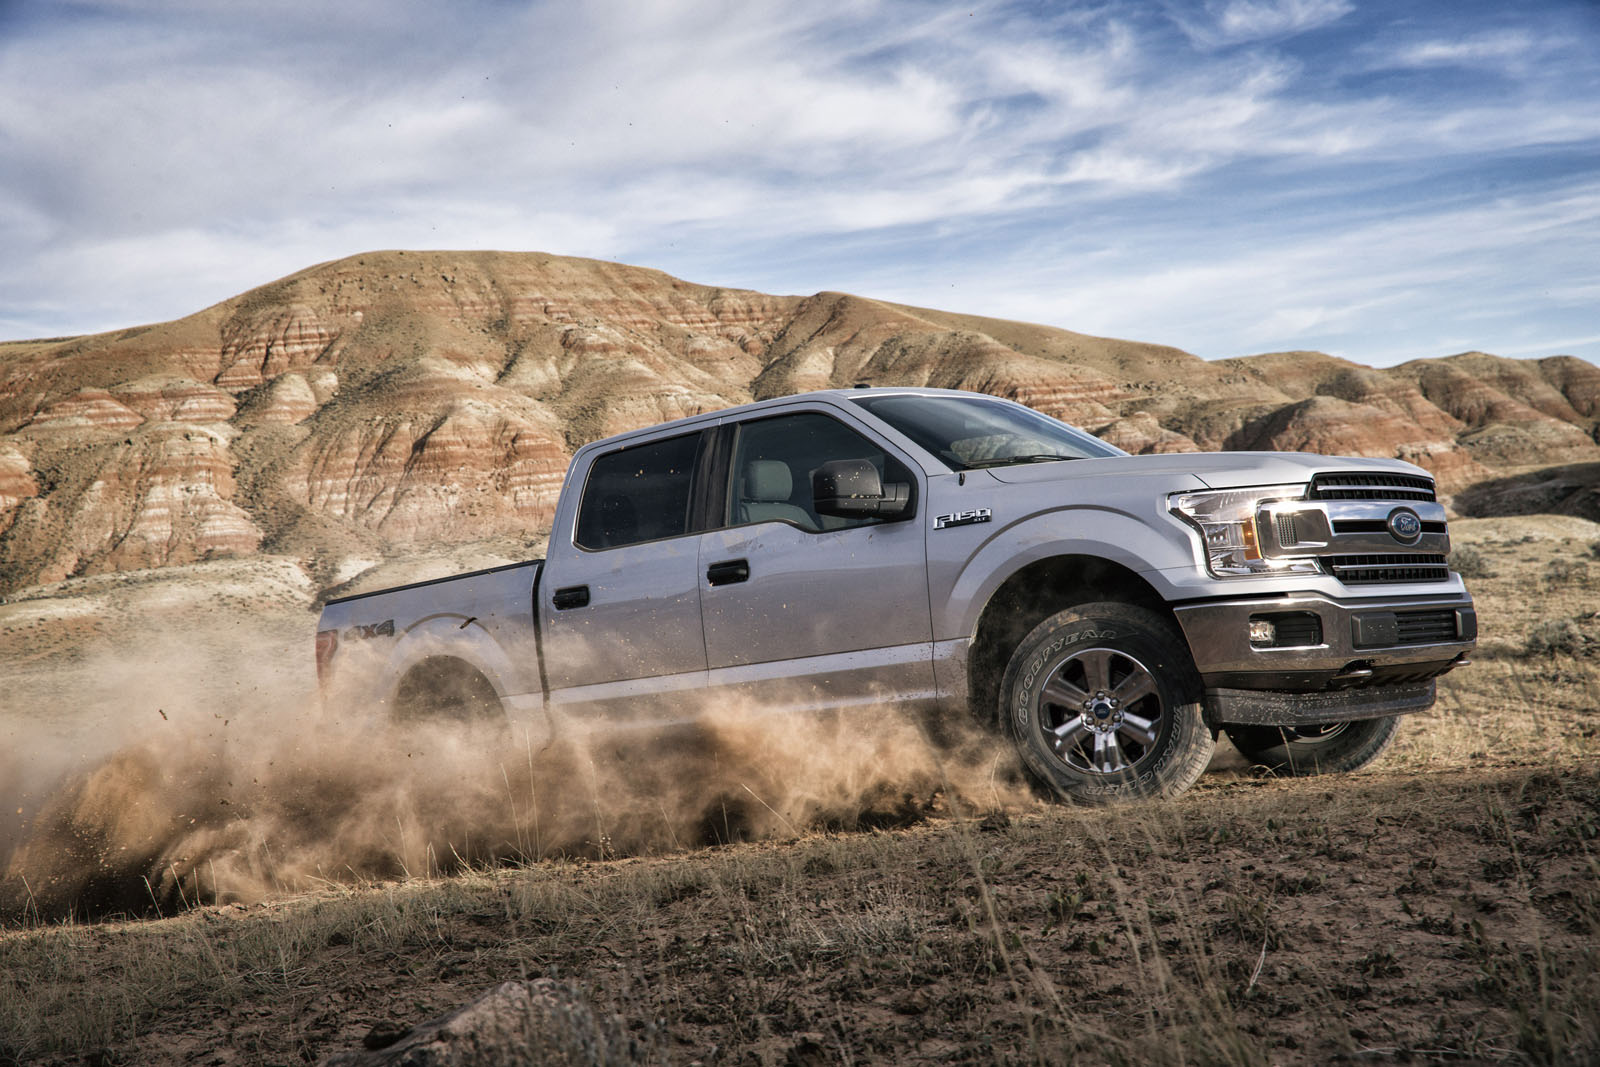 Ford, America’s truck leader, introduces the new 2018 Ford F-150 – now even tougher, even smarter and even more capable than ever.